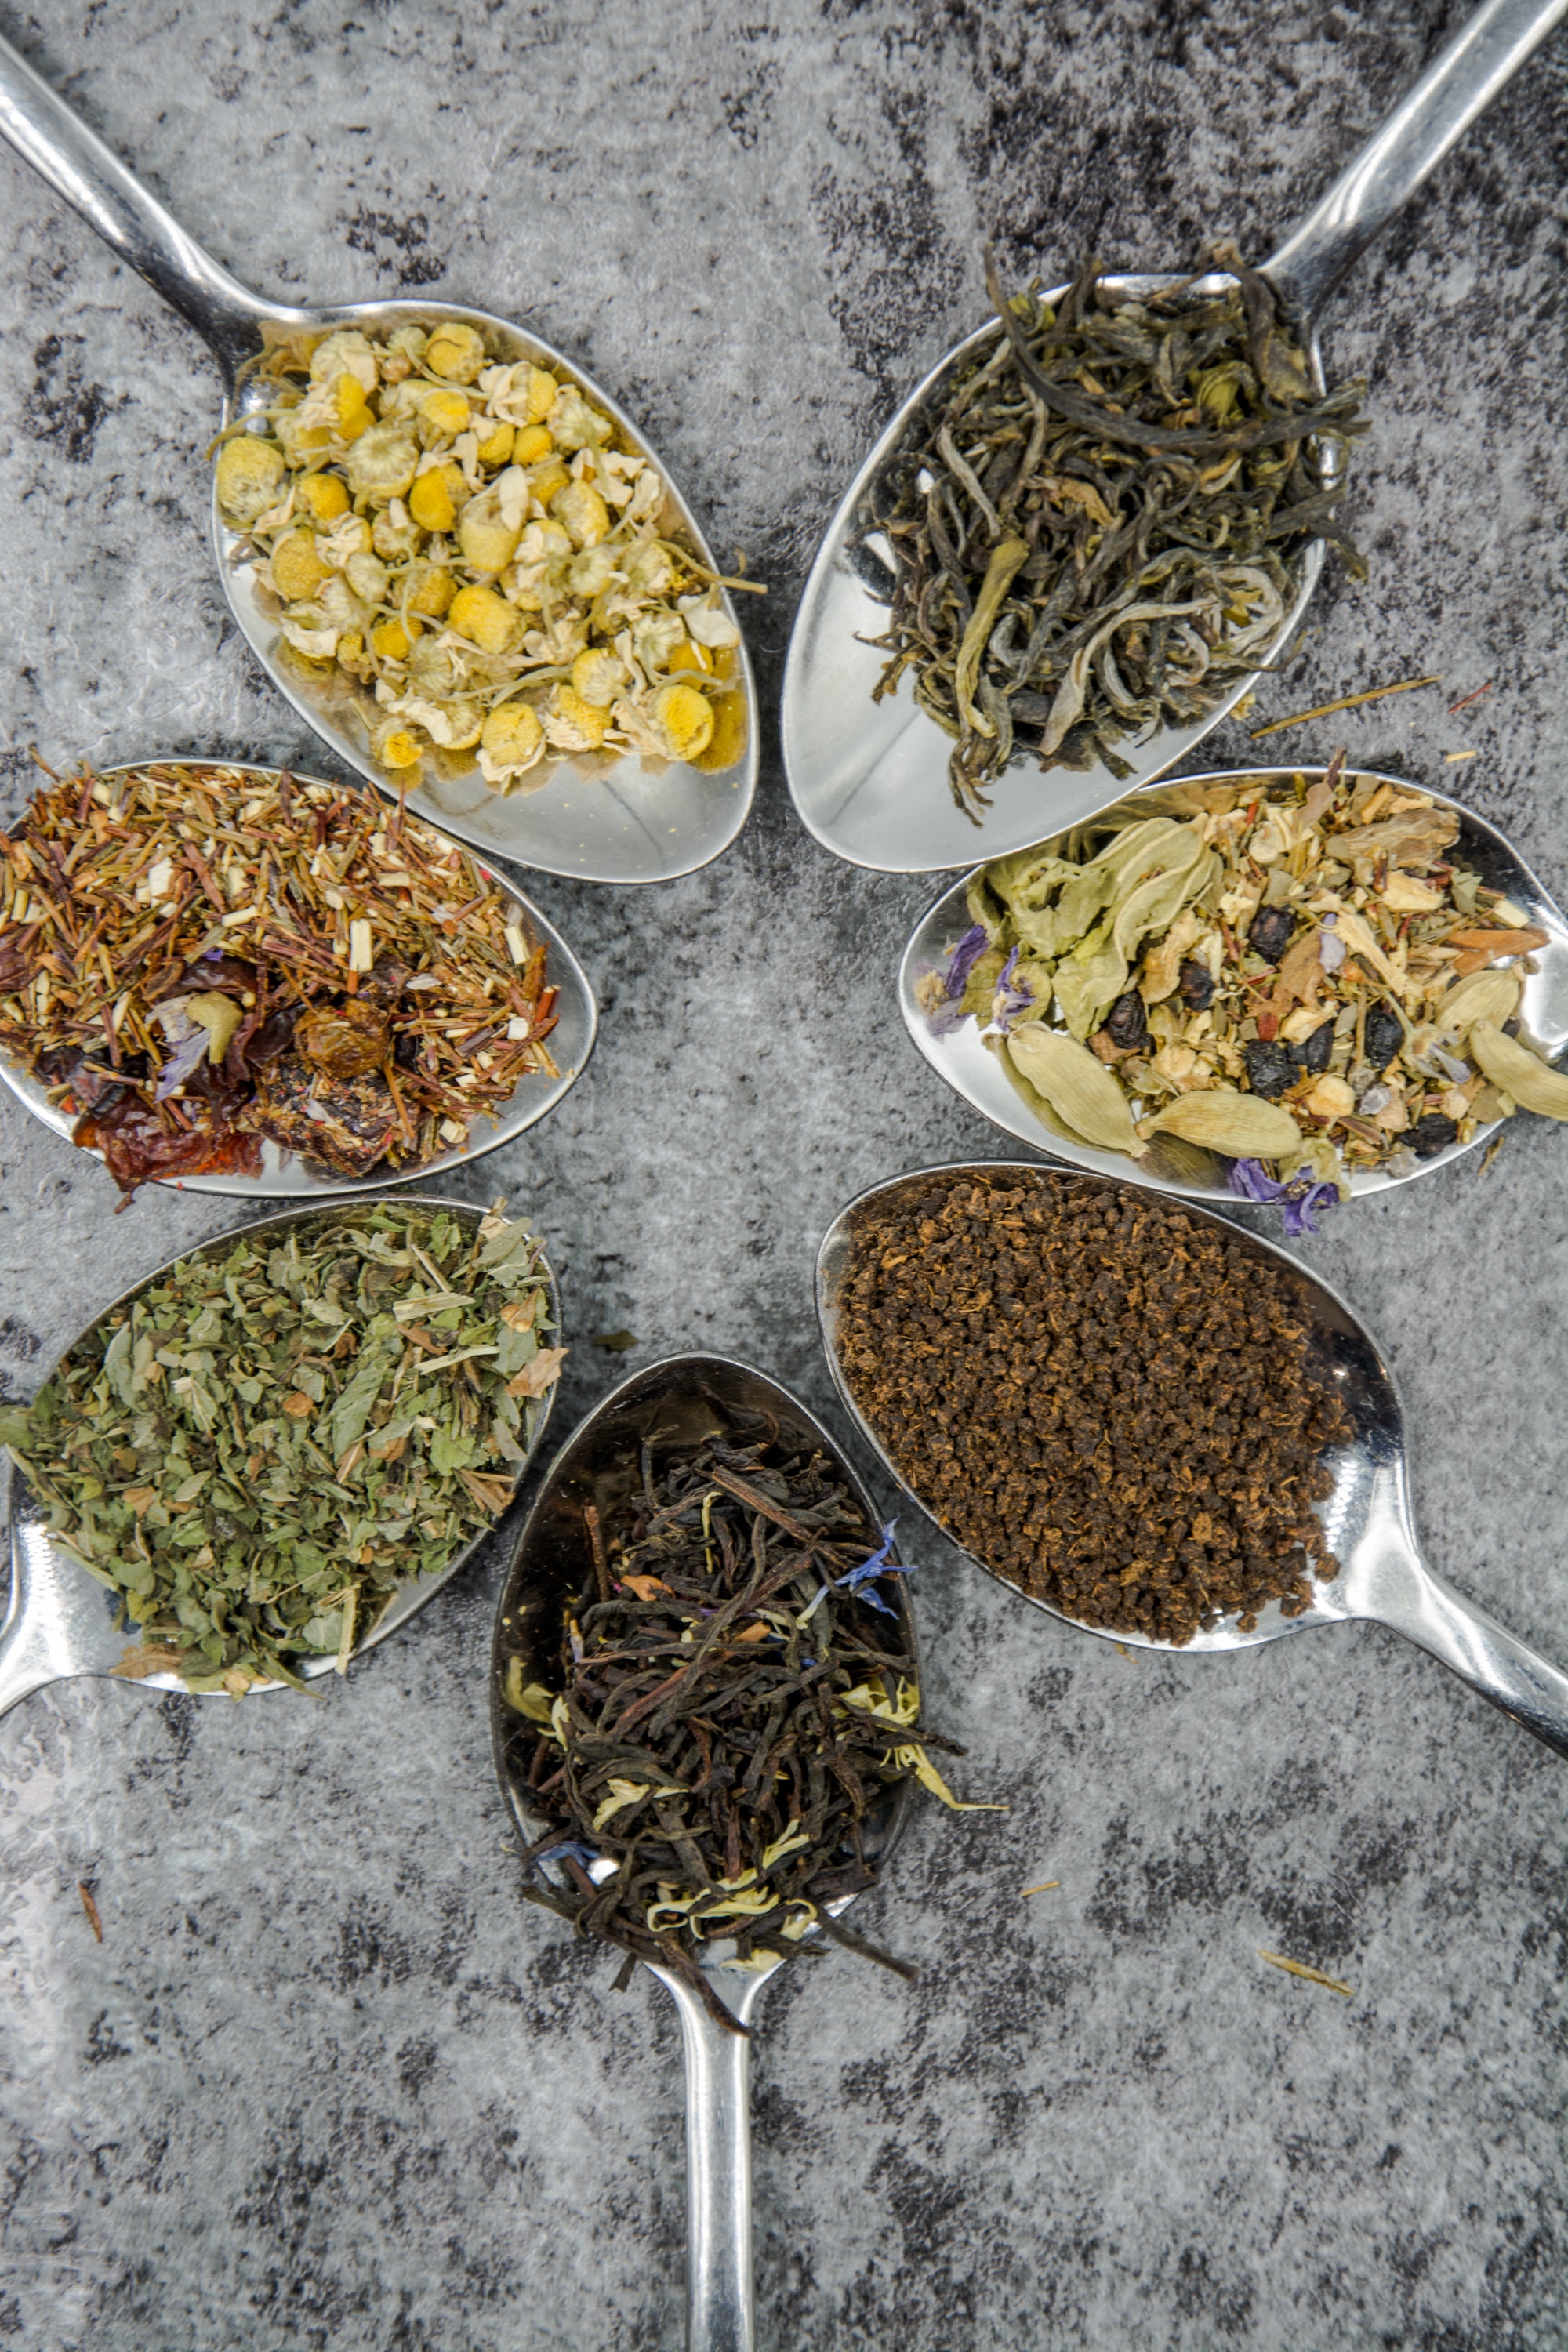 Best Bulk Herbs And Spices For Herbal Tea shown on spoons